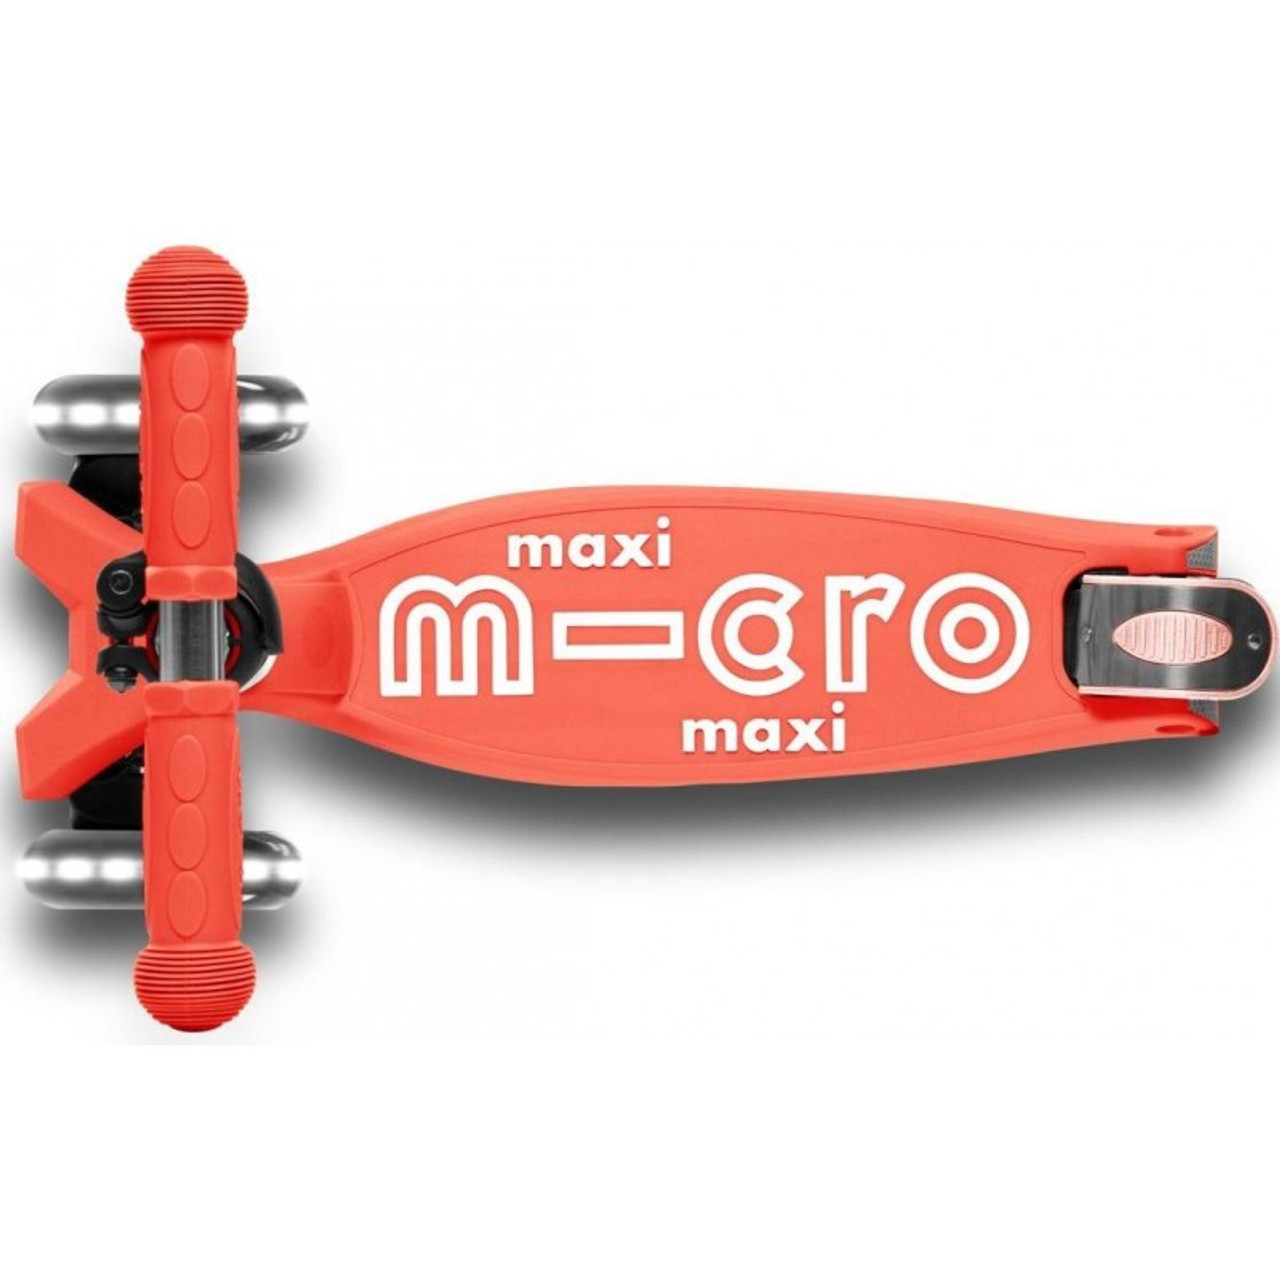 MAXI MICRO FOLDABLE DELUXE BRIGHT CORAL LED